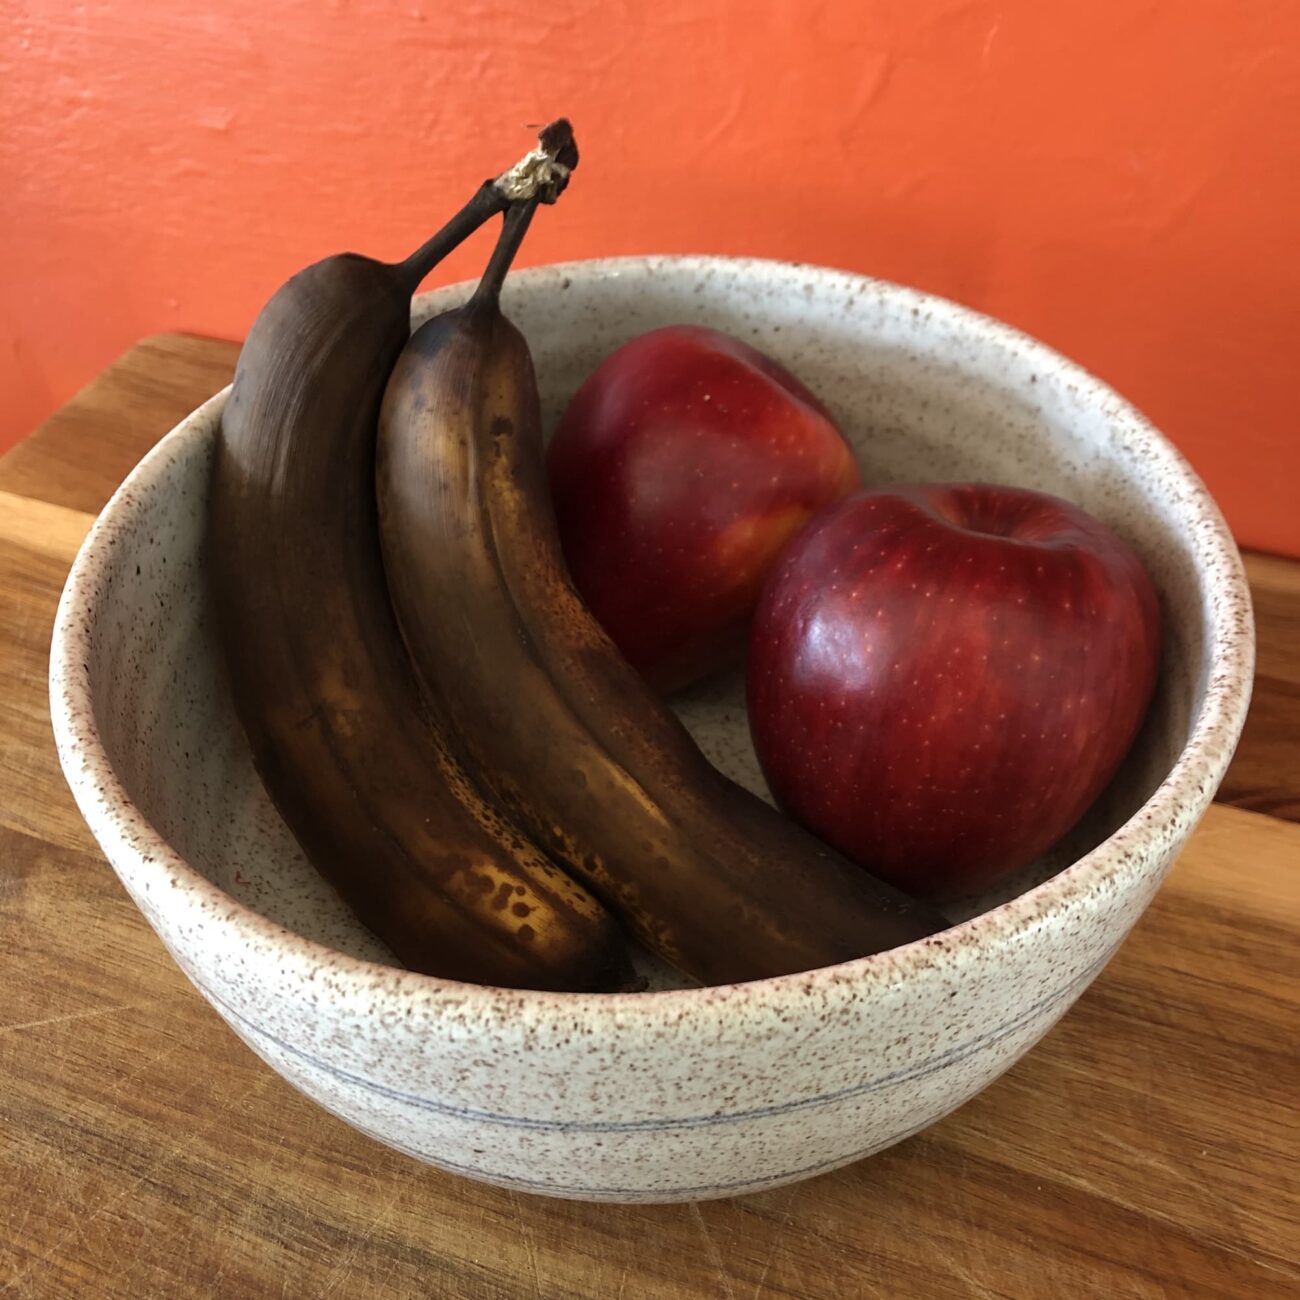 Fruit bowl siting on a counter with two overripe bananas and two red apples inside.